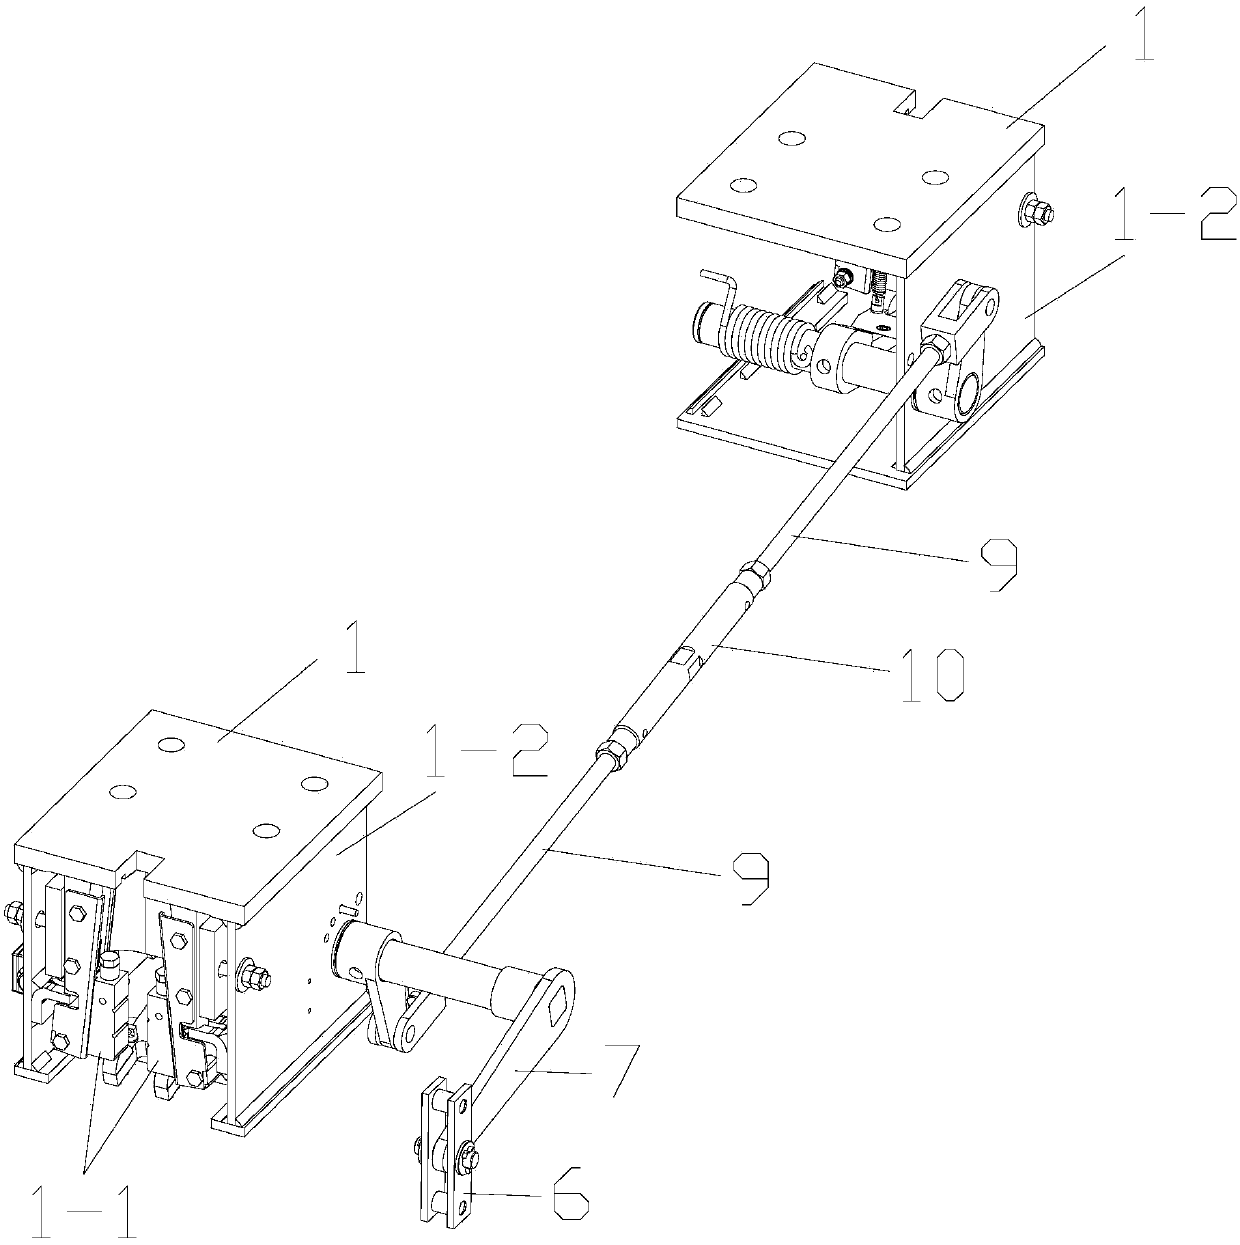 Braking device integrated with safety gear and lifting mechanism